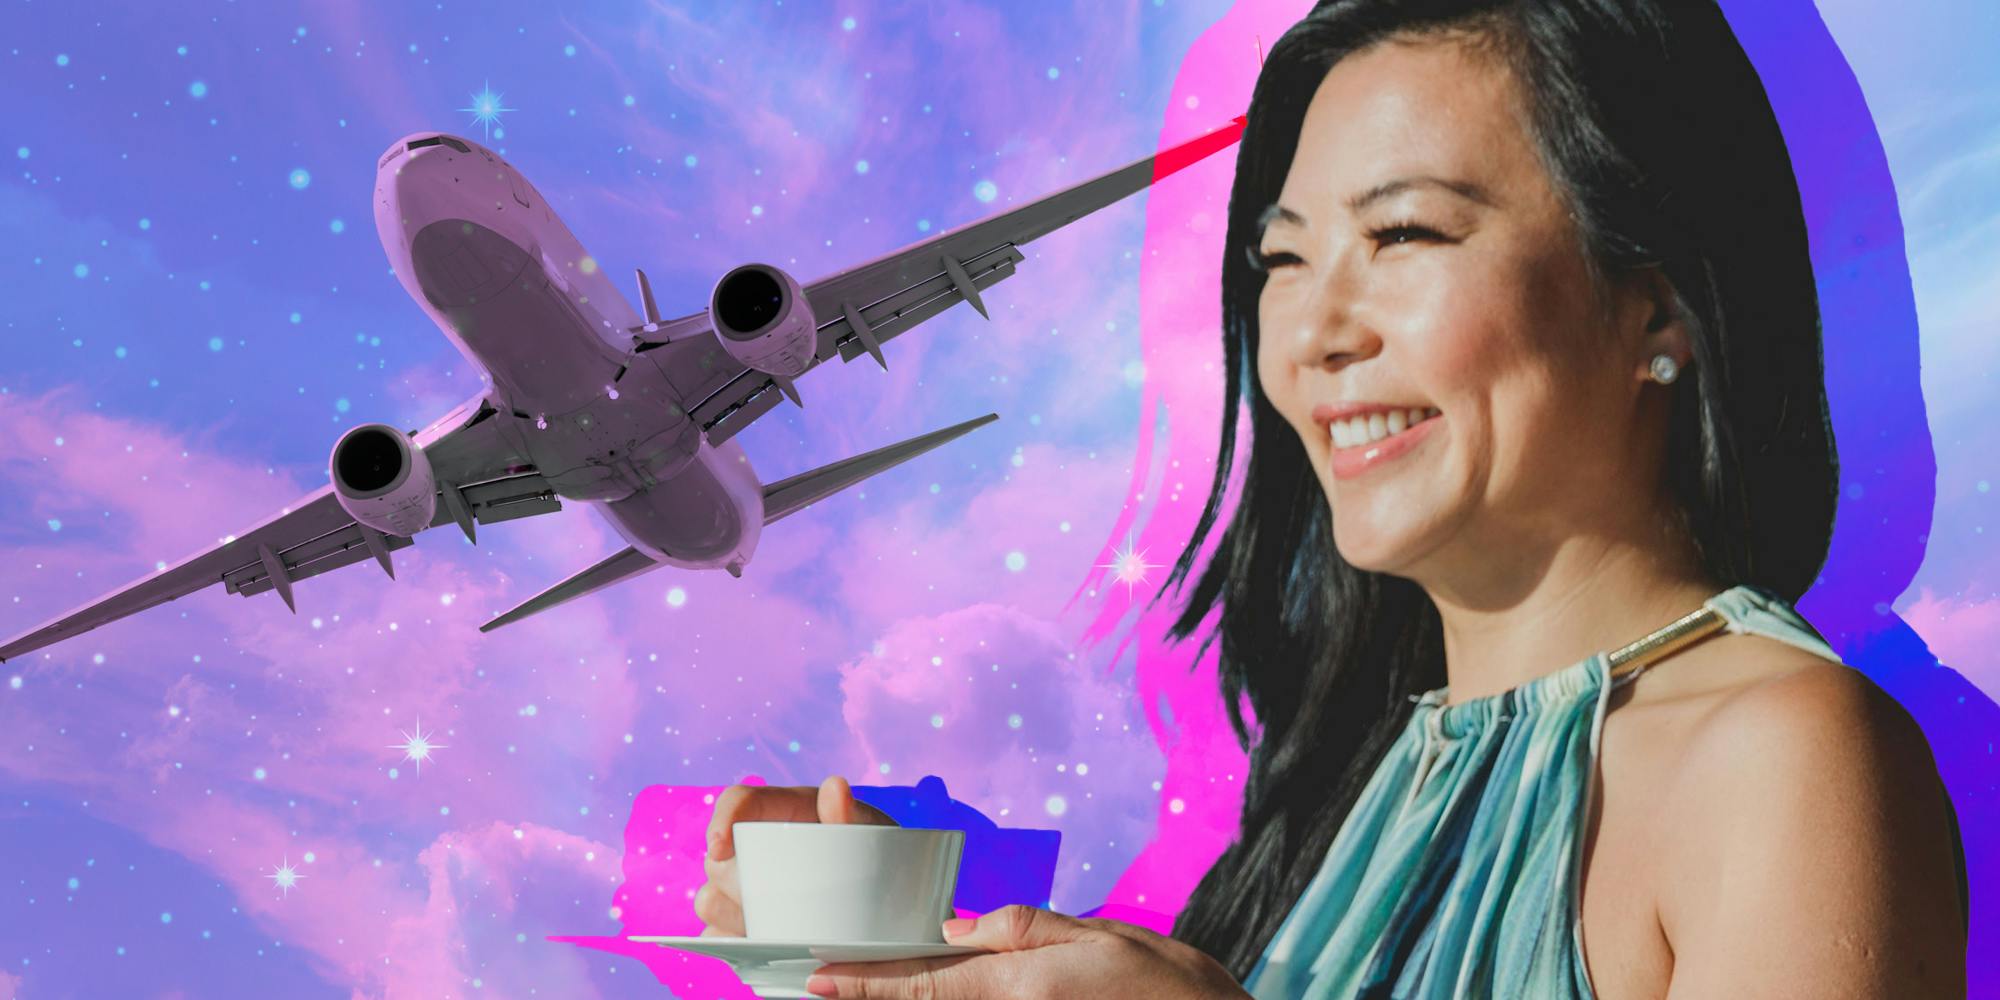 Influencer drinking coffee in front of airplane